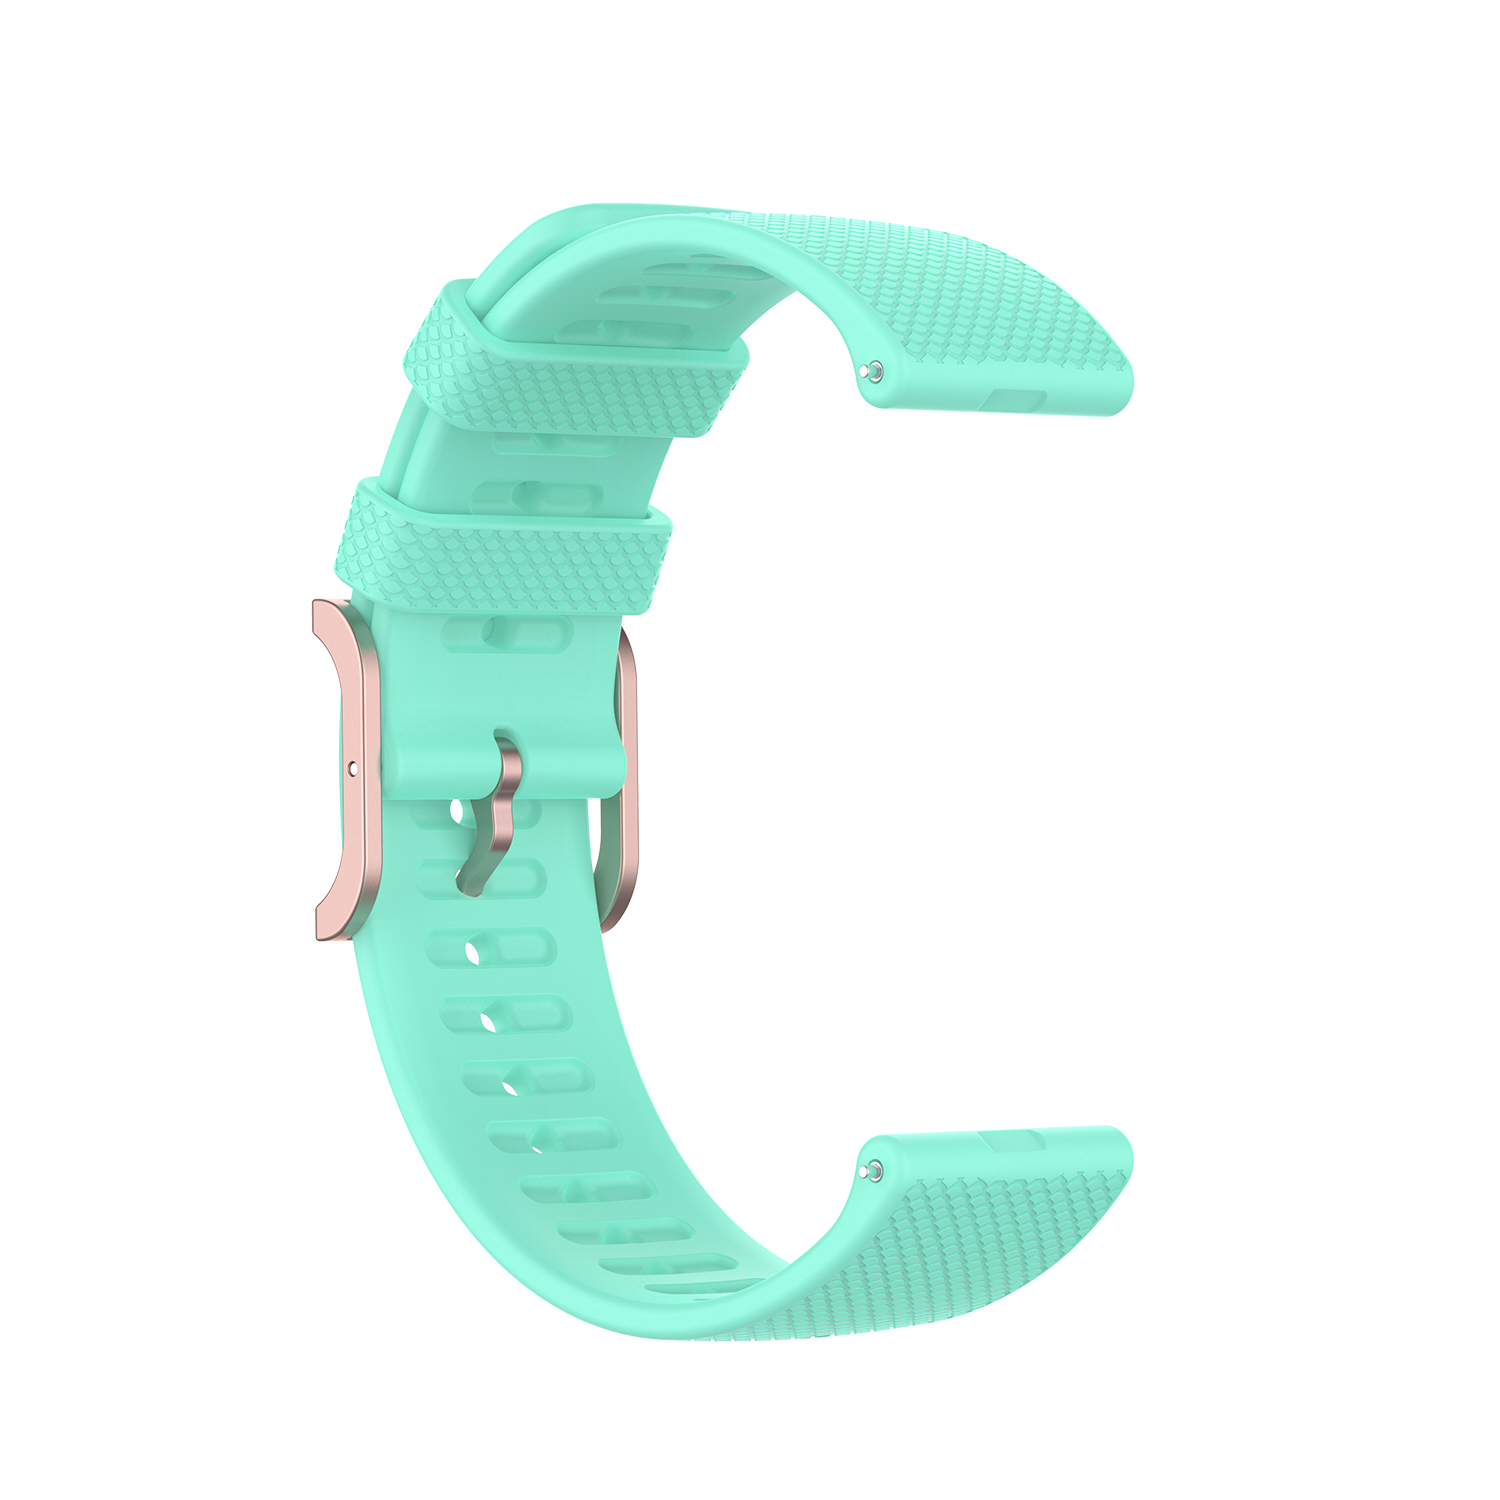 Bakeey-22mm-Silicone-Dot-Pattern-Smart-Watch-Band-Replacement-Strap-For-Ticwatch-pro2020Ticwatch-GTX-1723158-7